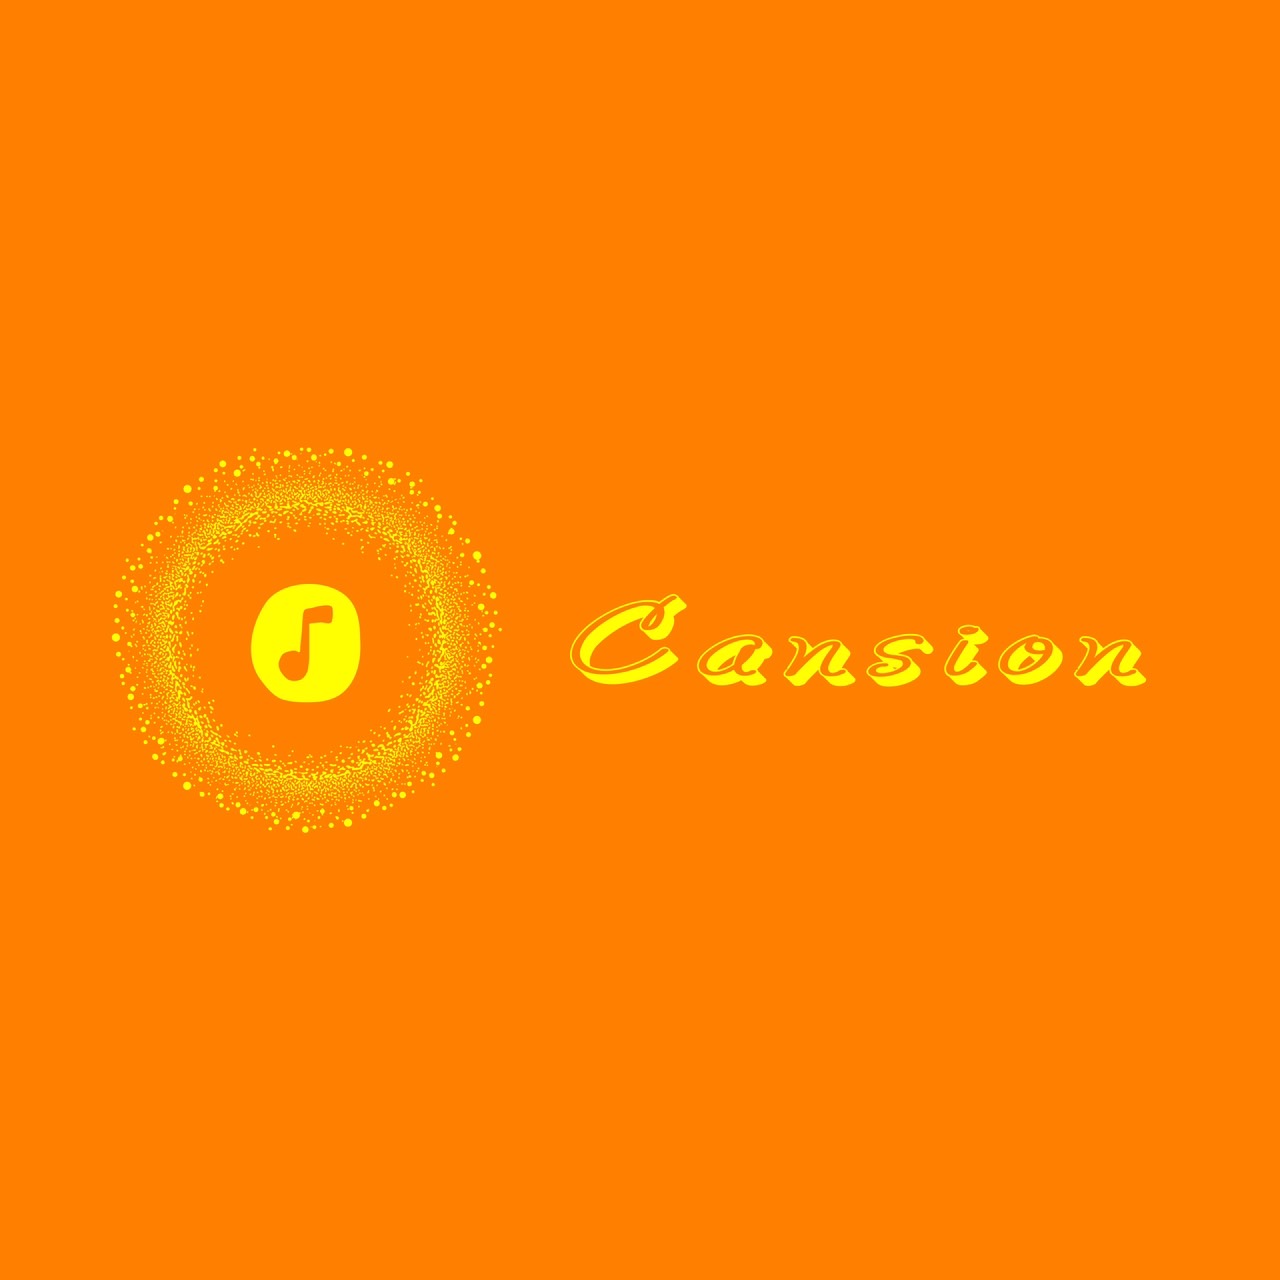 Cansion